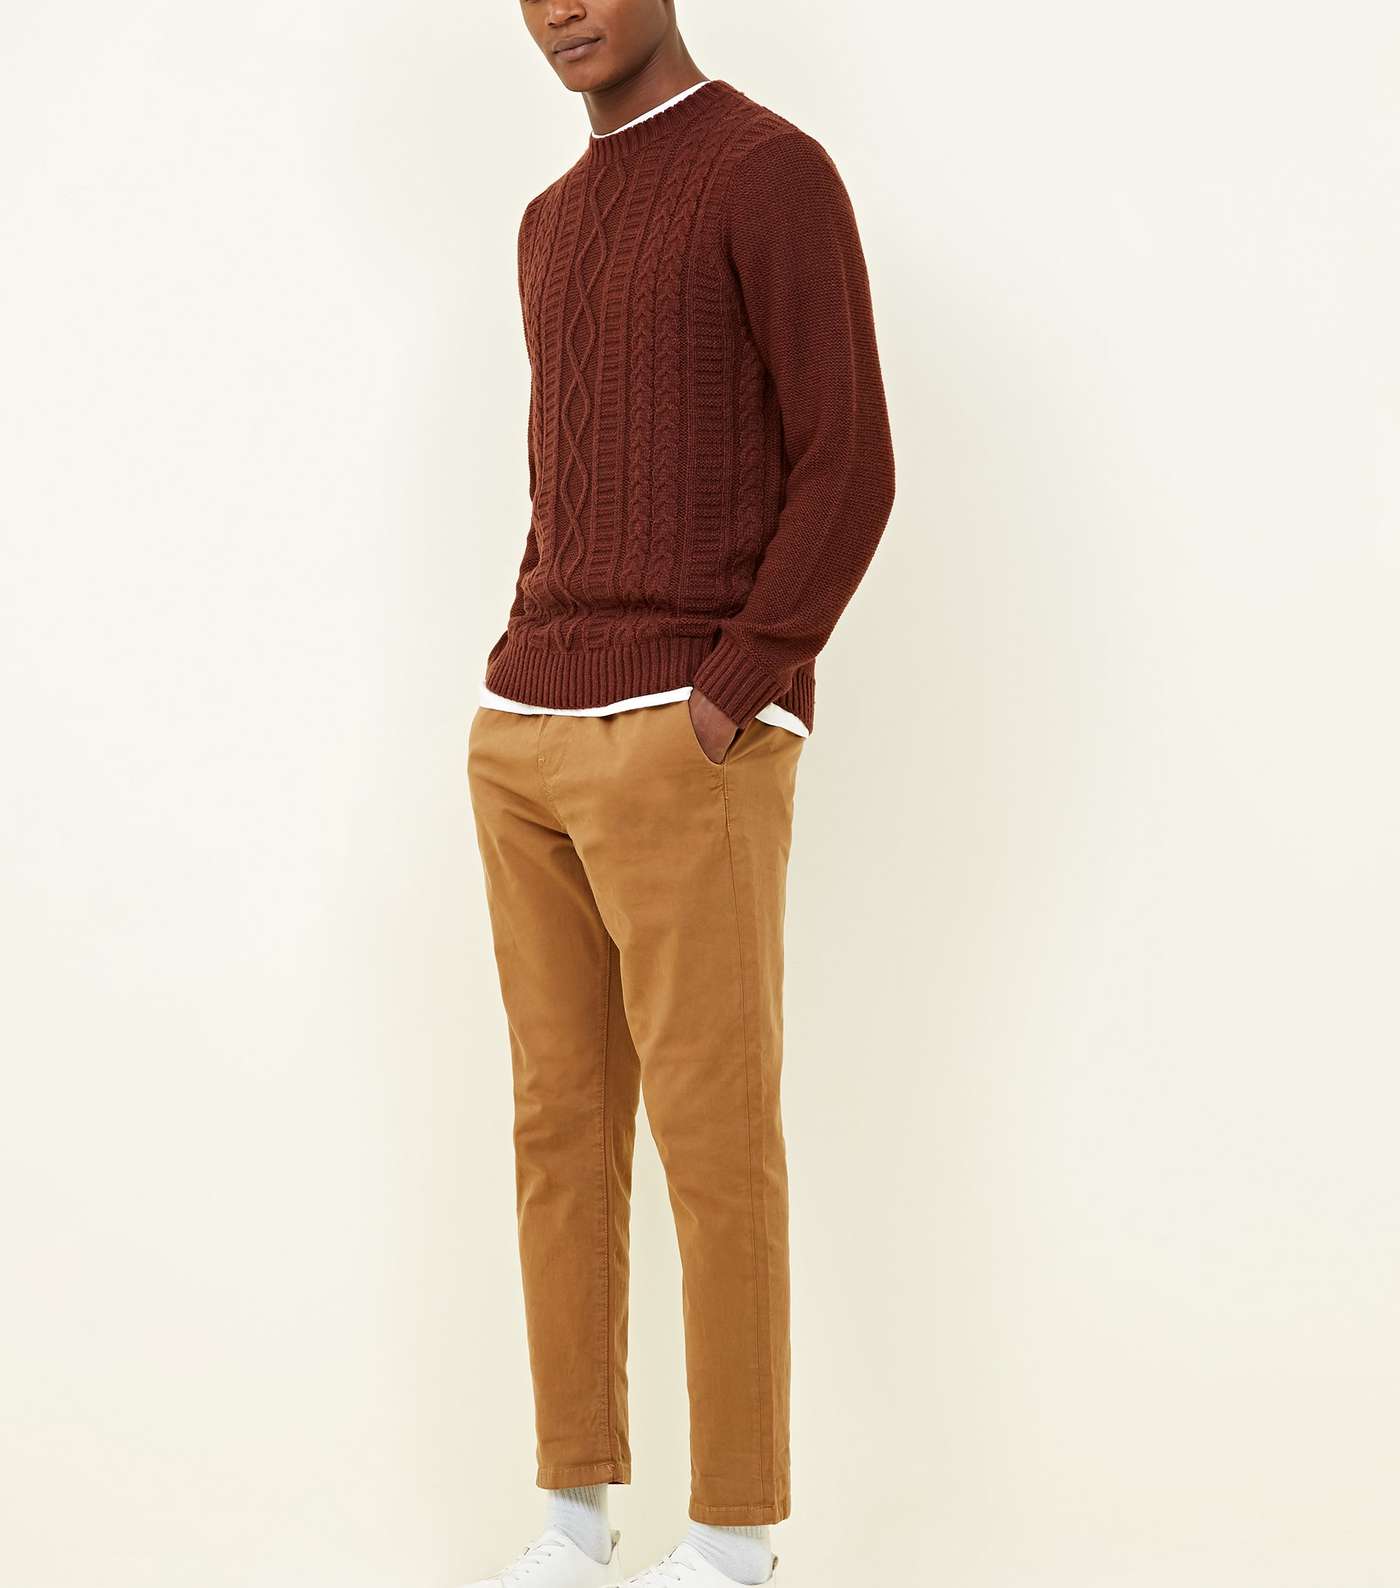 Rust Twisted Cable Knit Jumper Image 2